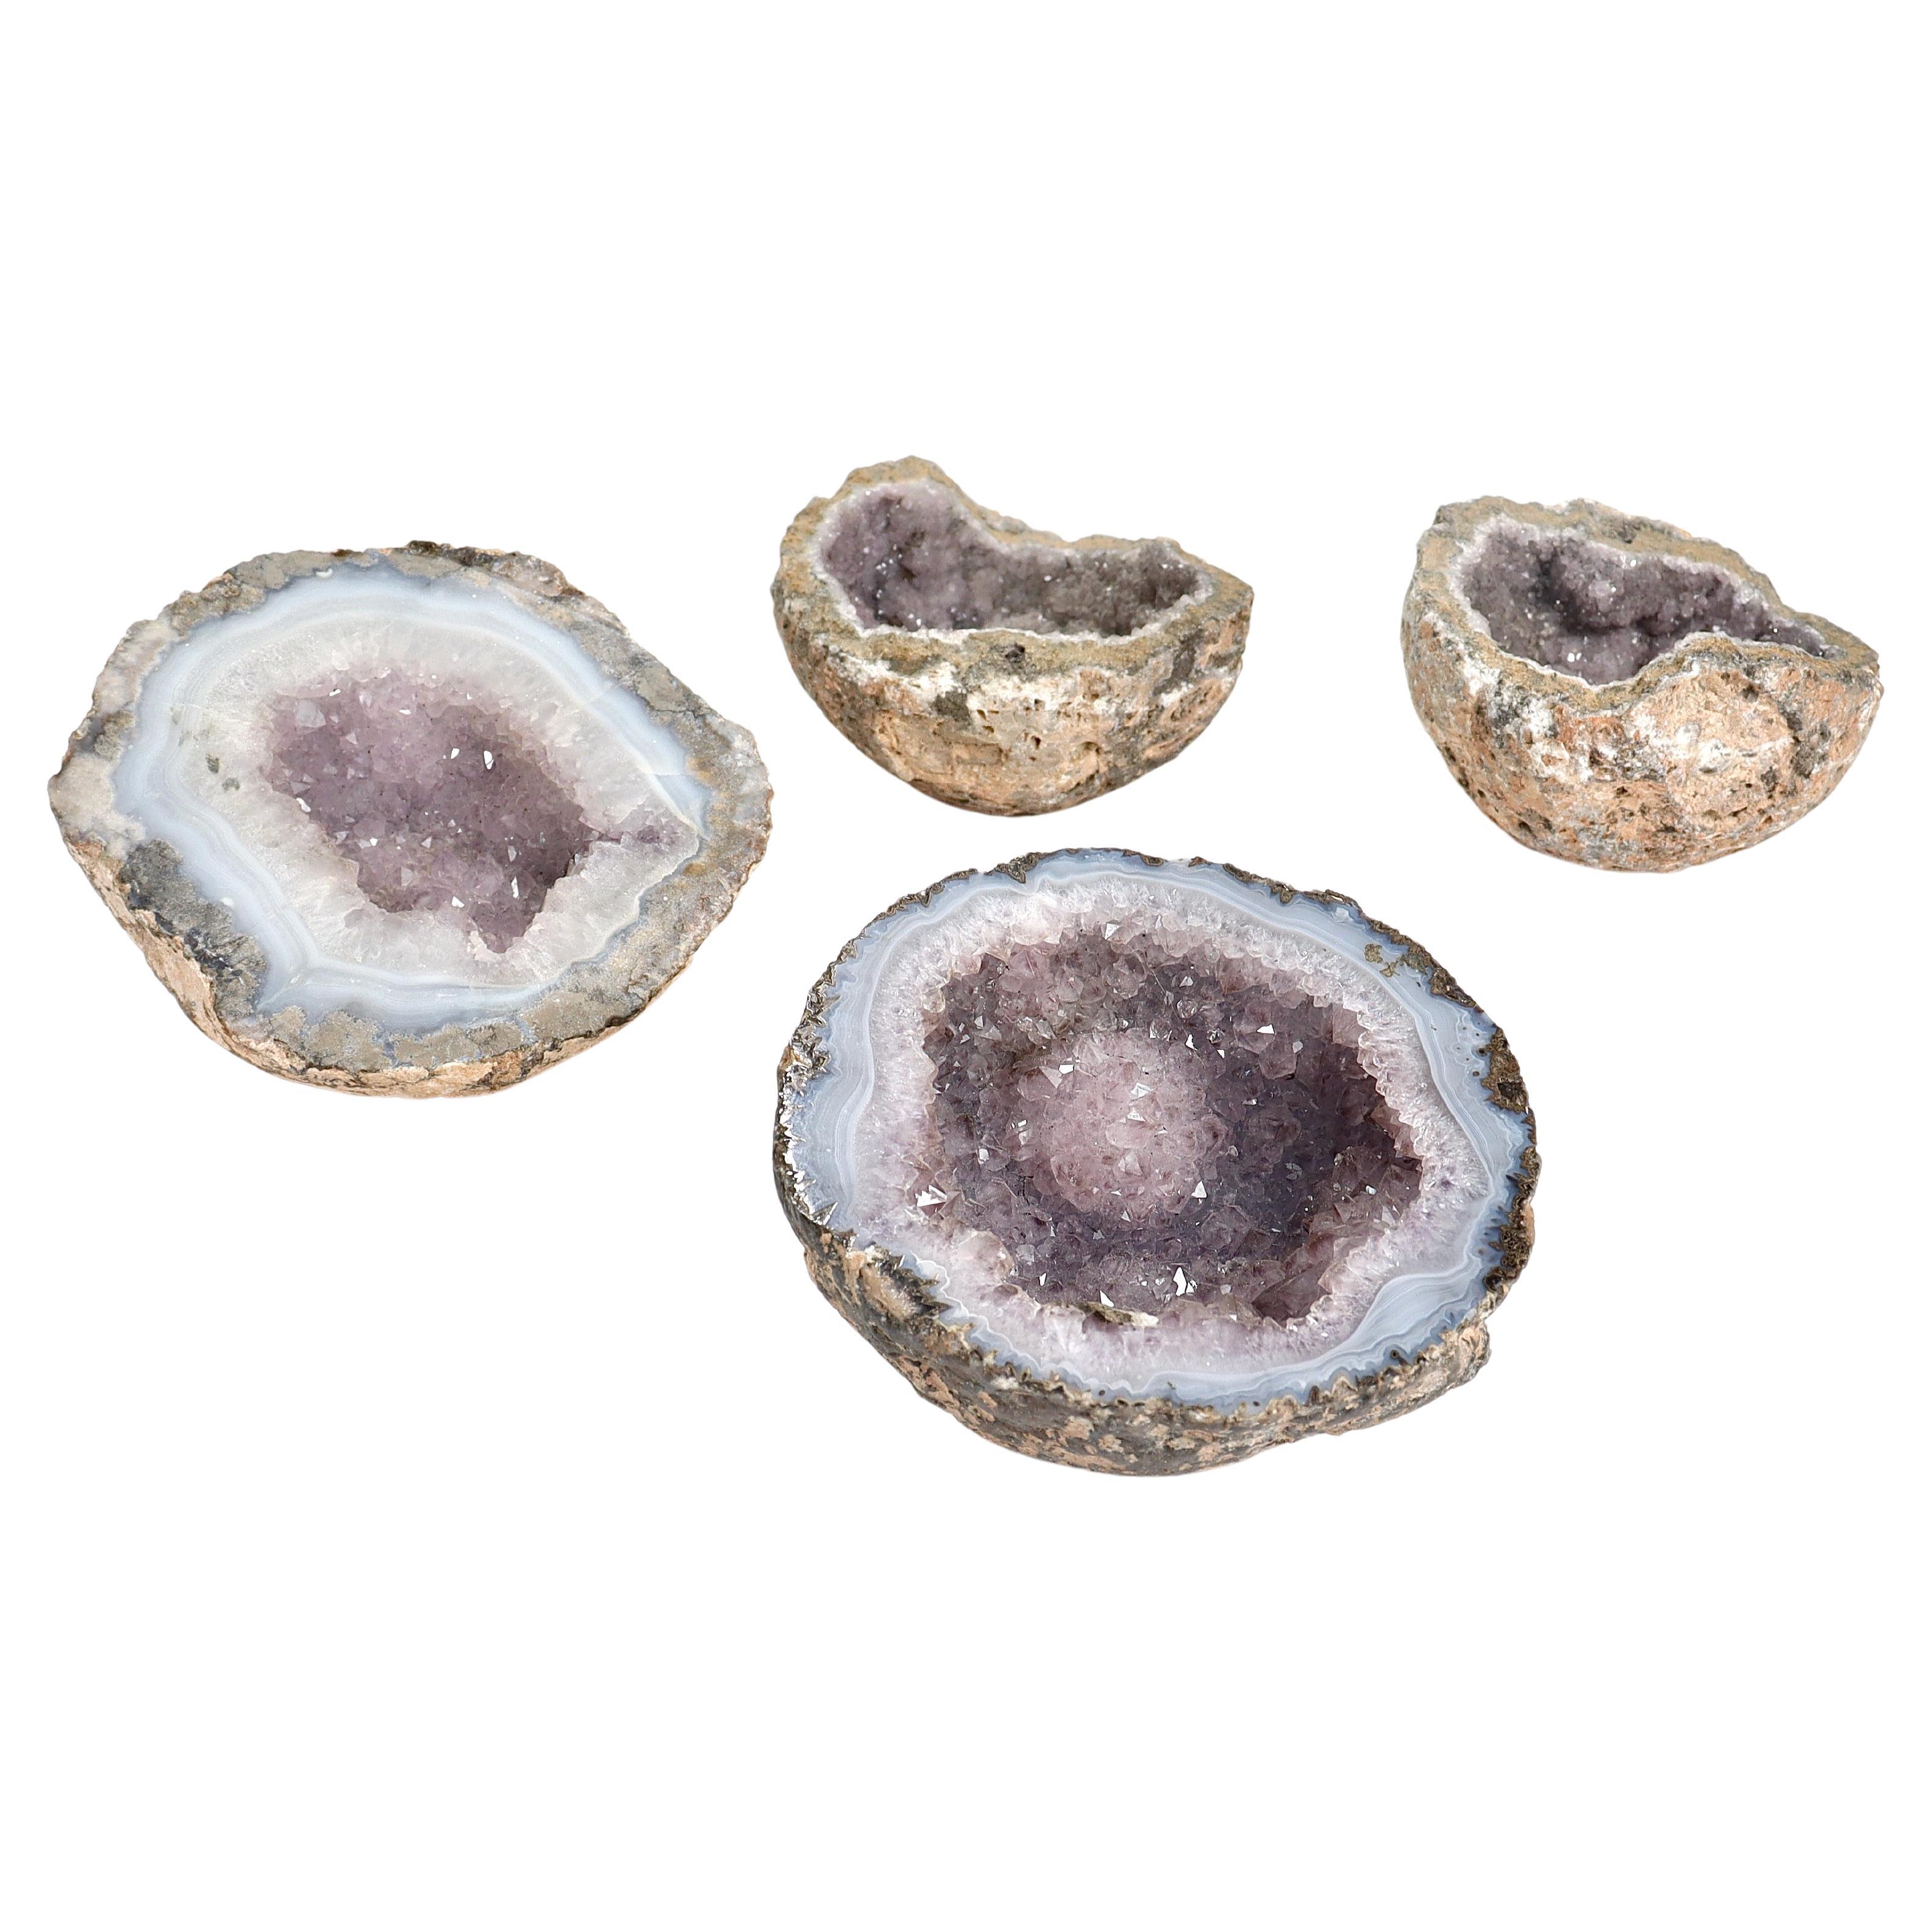 Group of 4 Amethyst Geodes